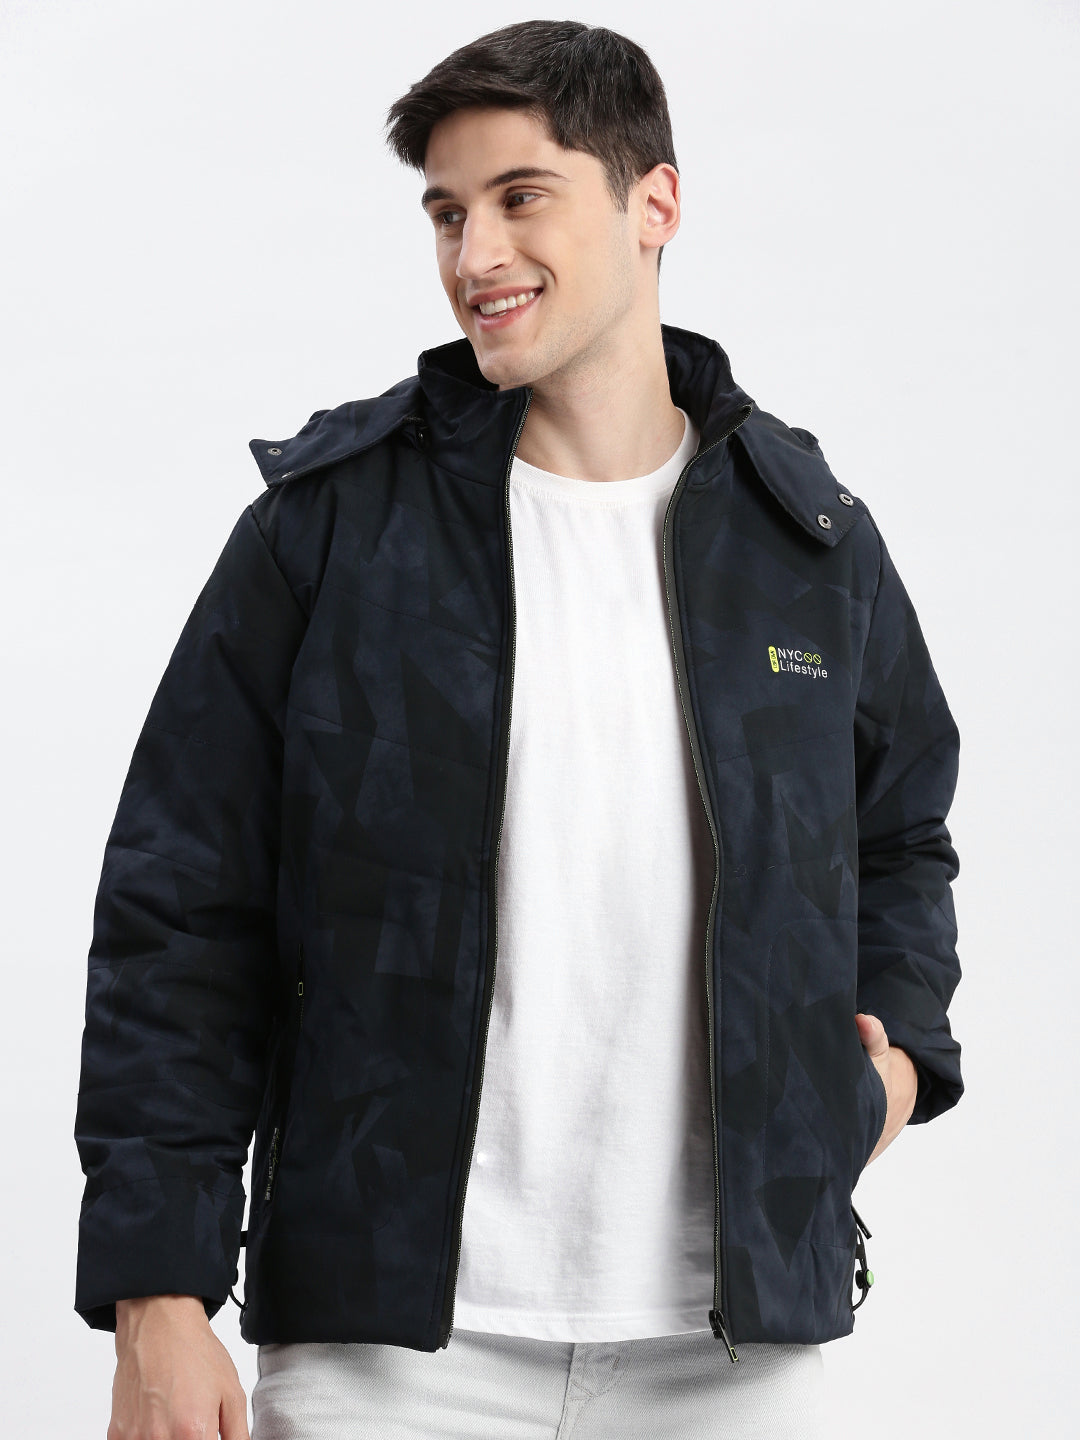 Men Abstract Mock Collar Navy Blue Puffer Jacket Comes with Detachable Hoodie